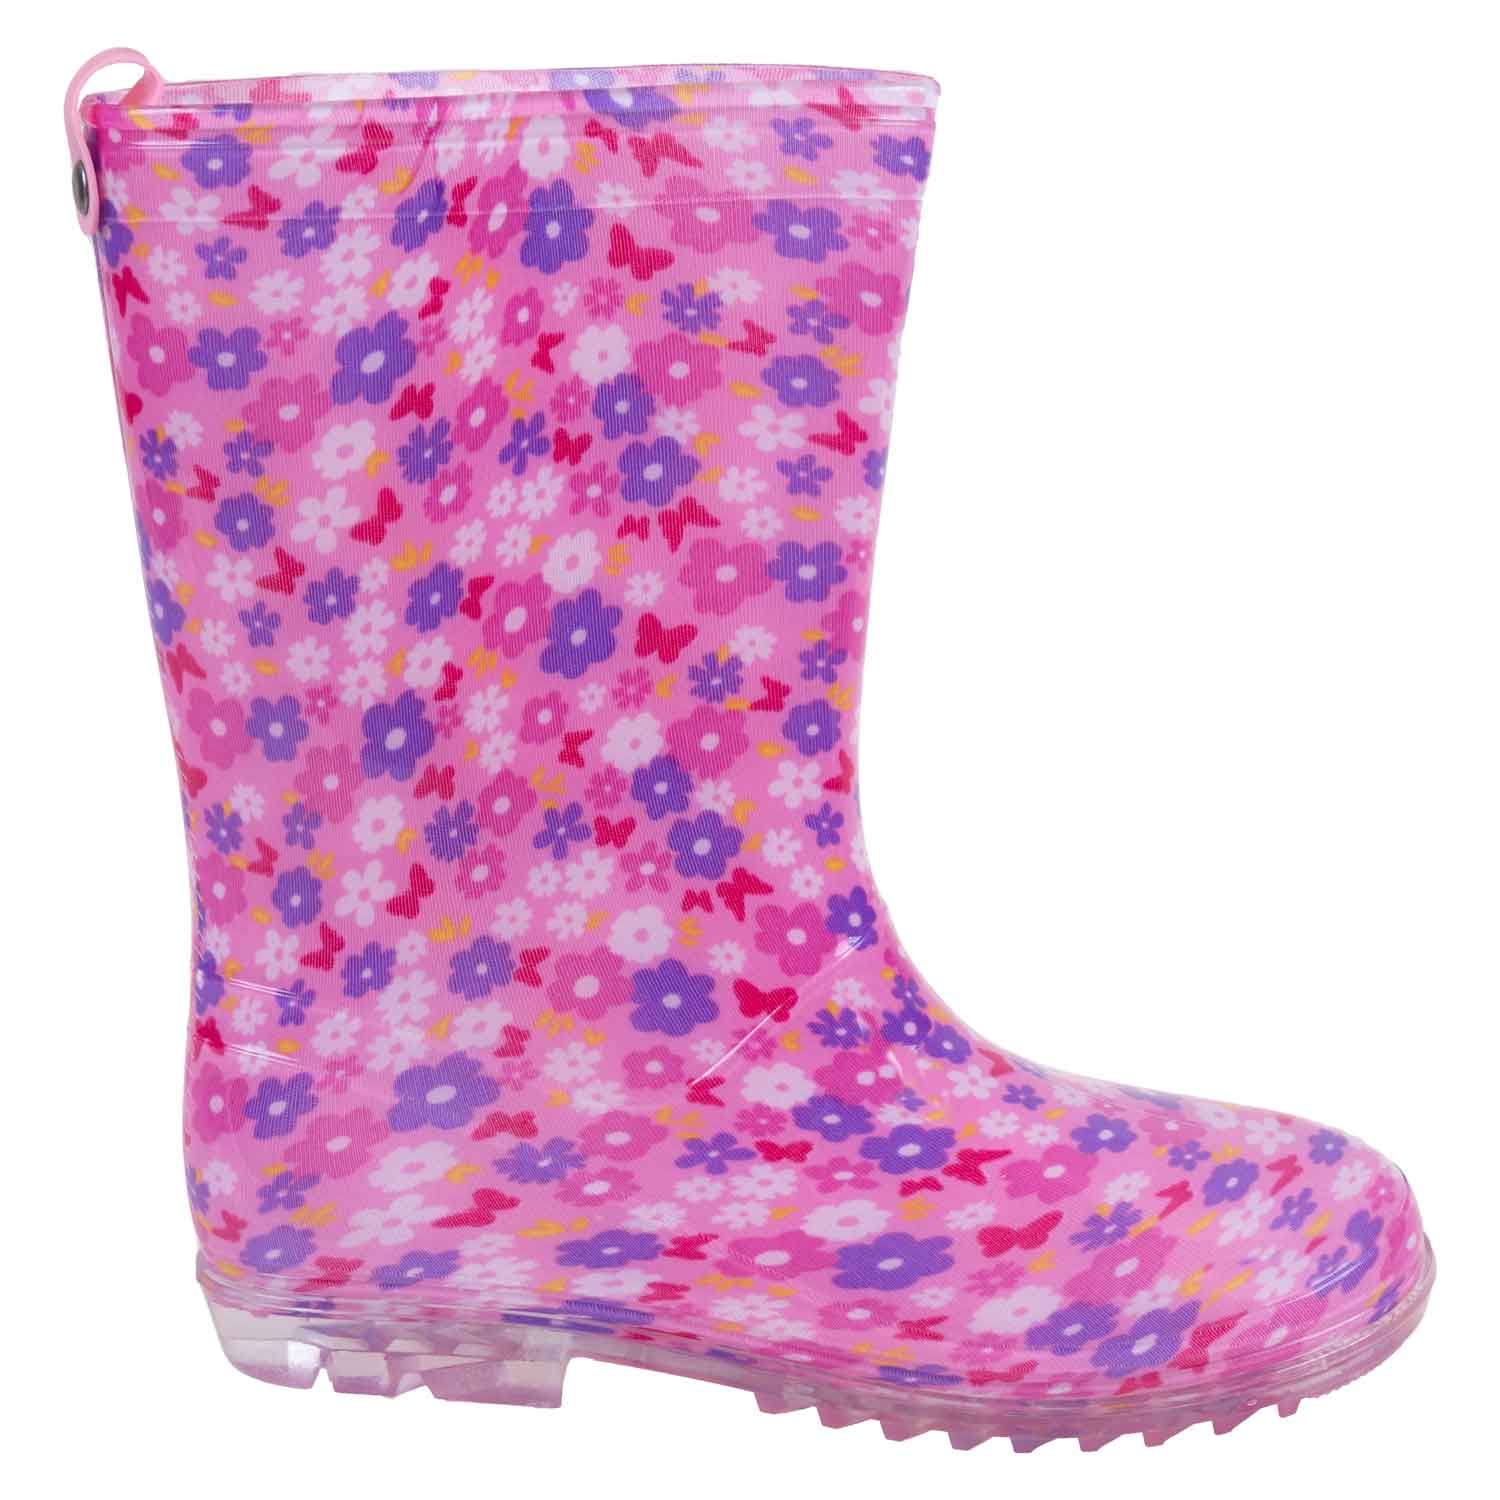 Rubber rain boots - Ditsy daisies, size 13